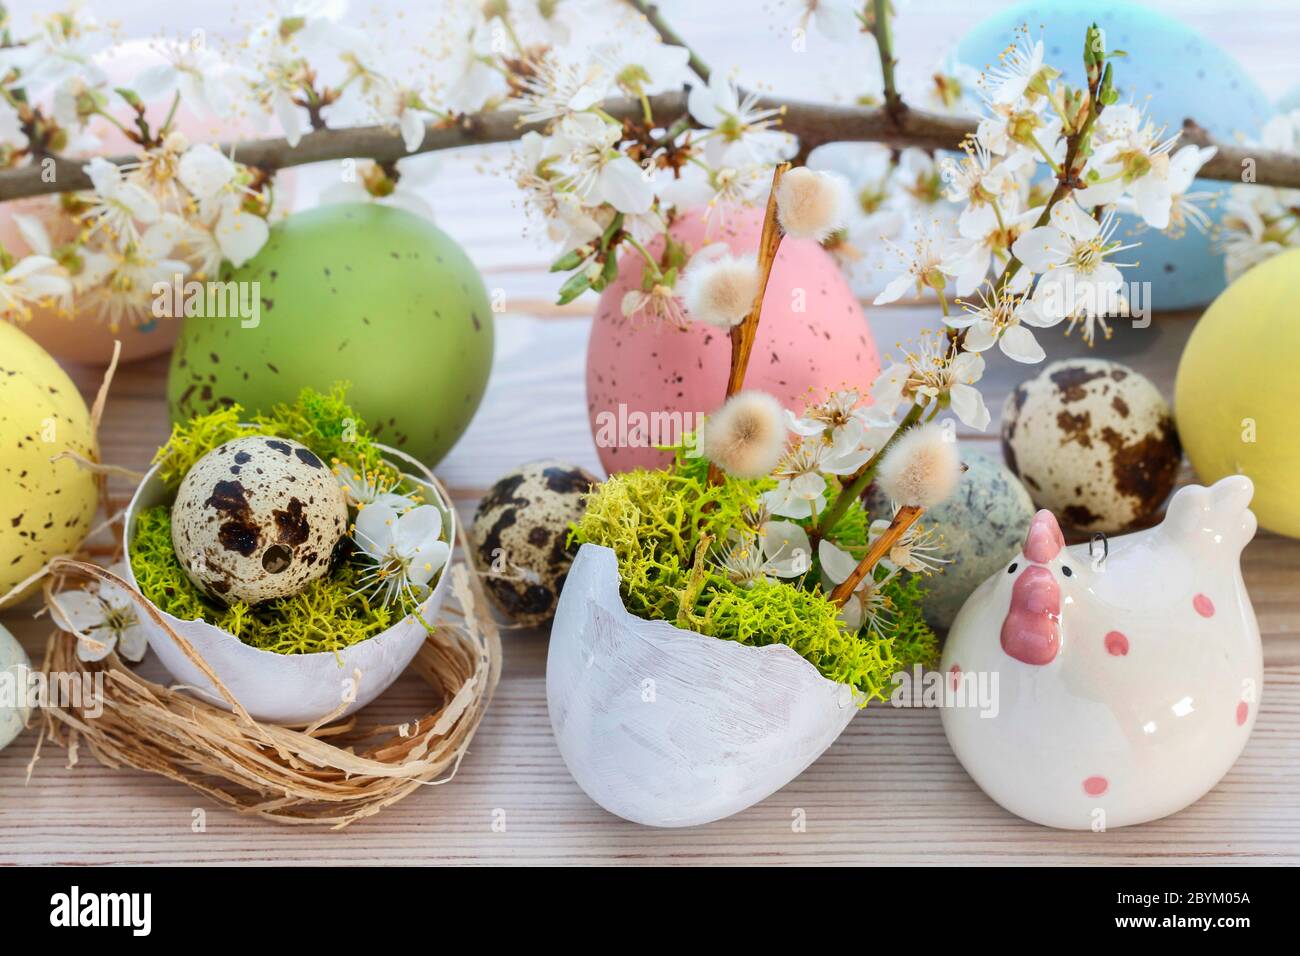 Easter table decoration with cherry blossom branch and colorful eggs on a wooden table. Stock Photo